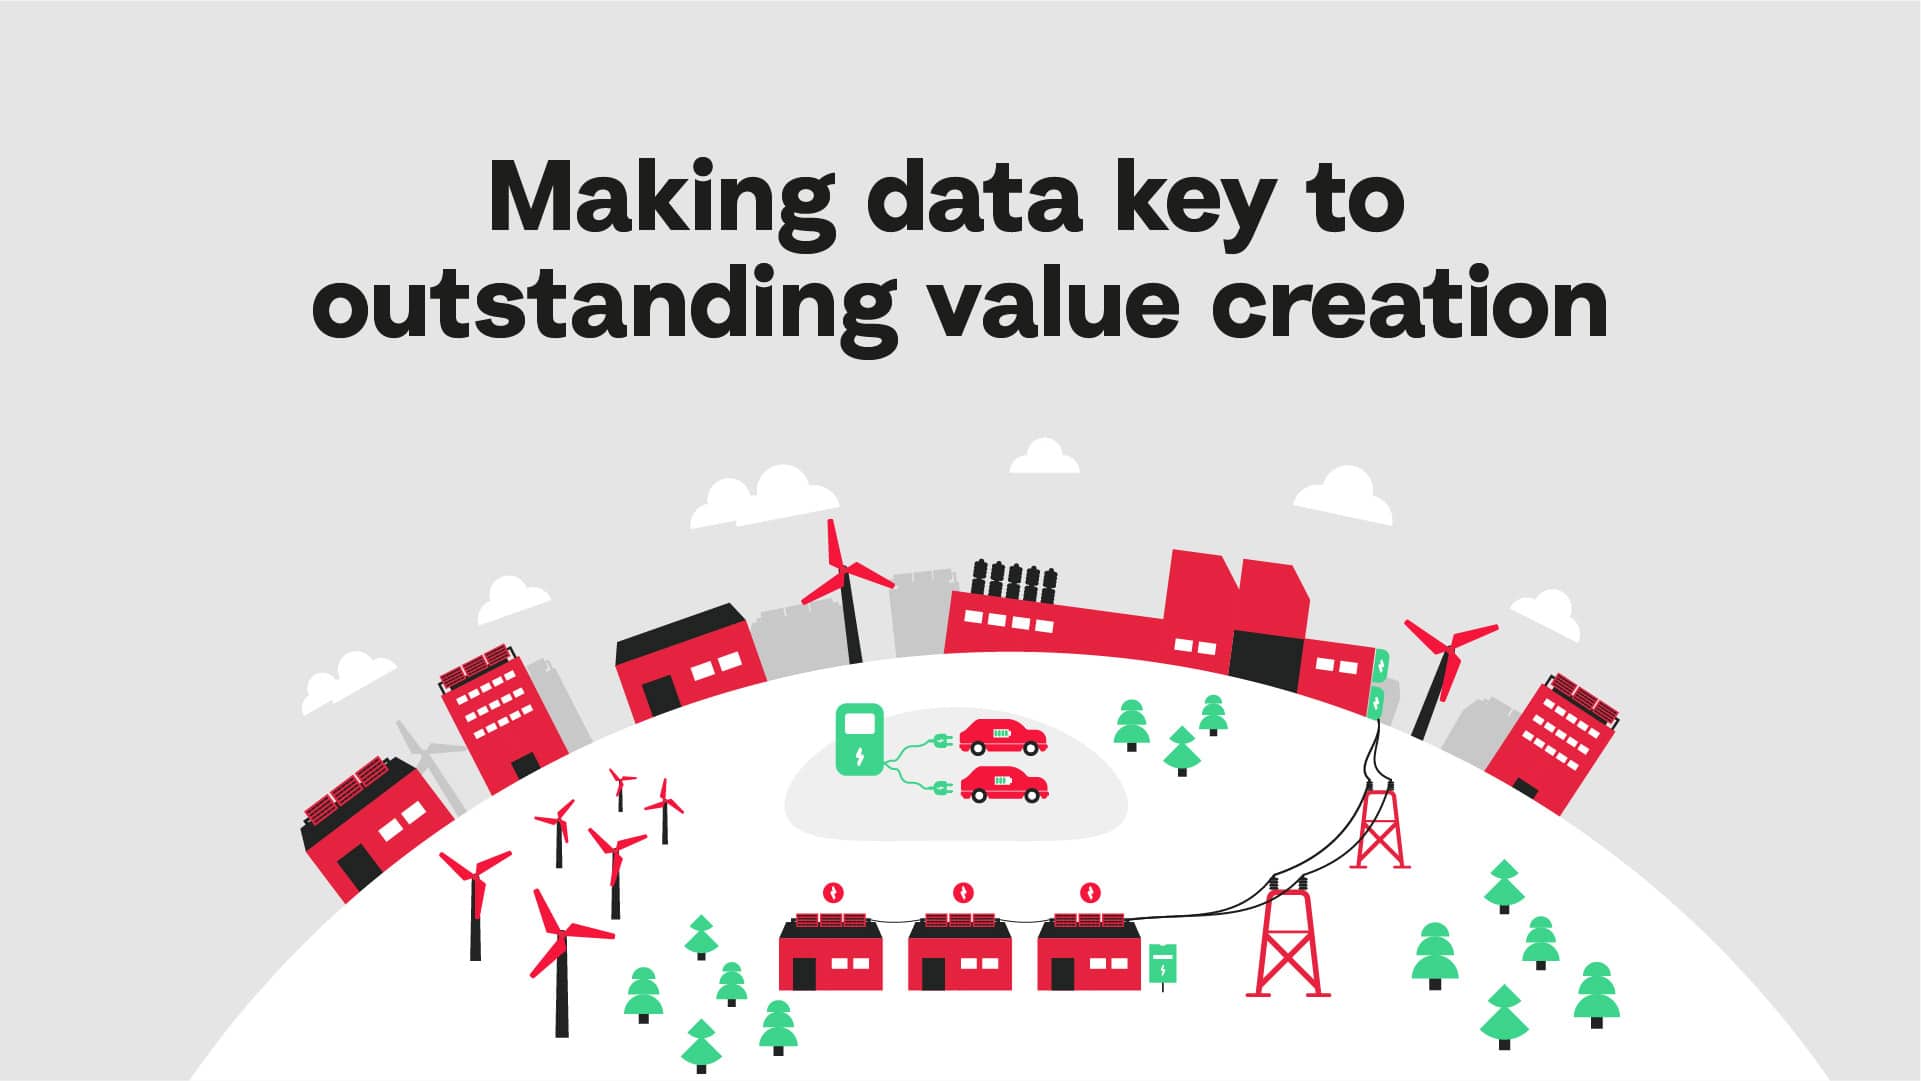 Embriq - Making data key to outstanding value creation